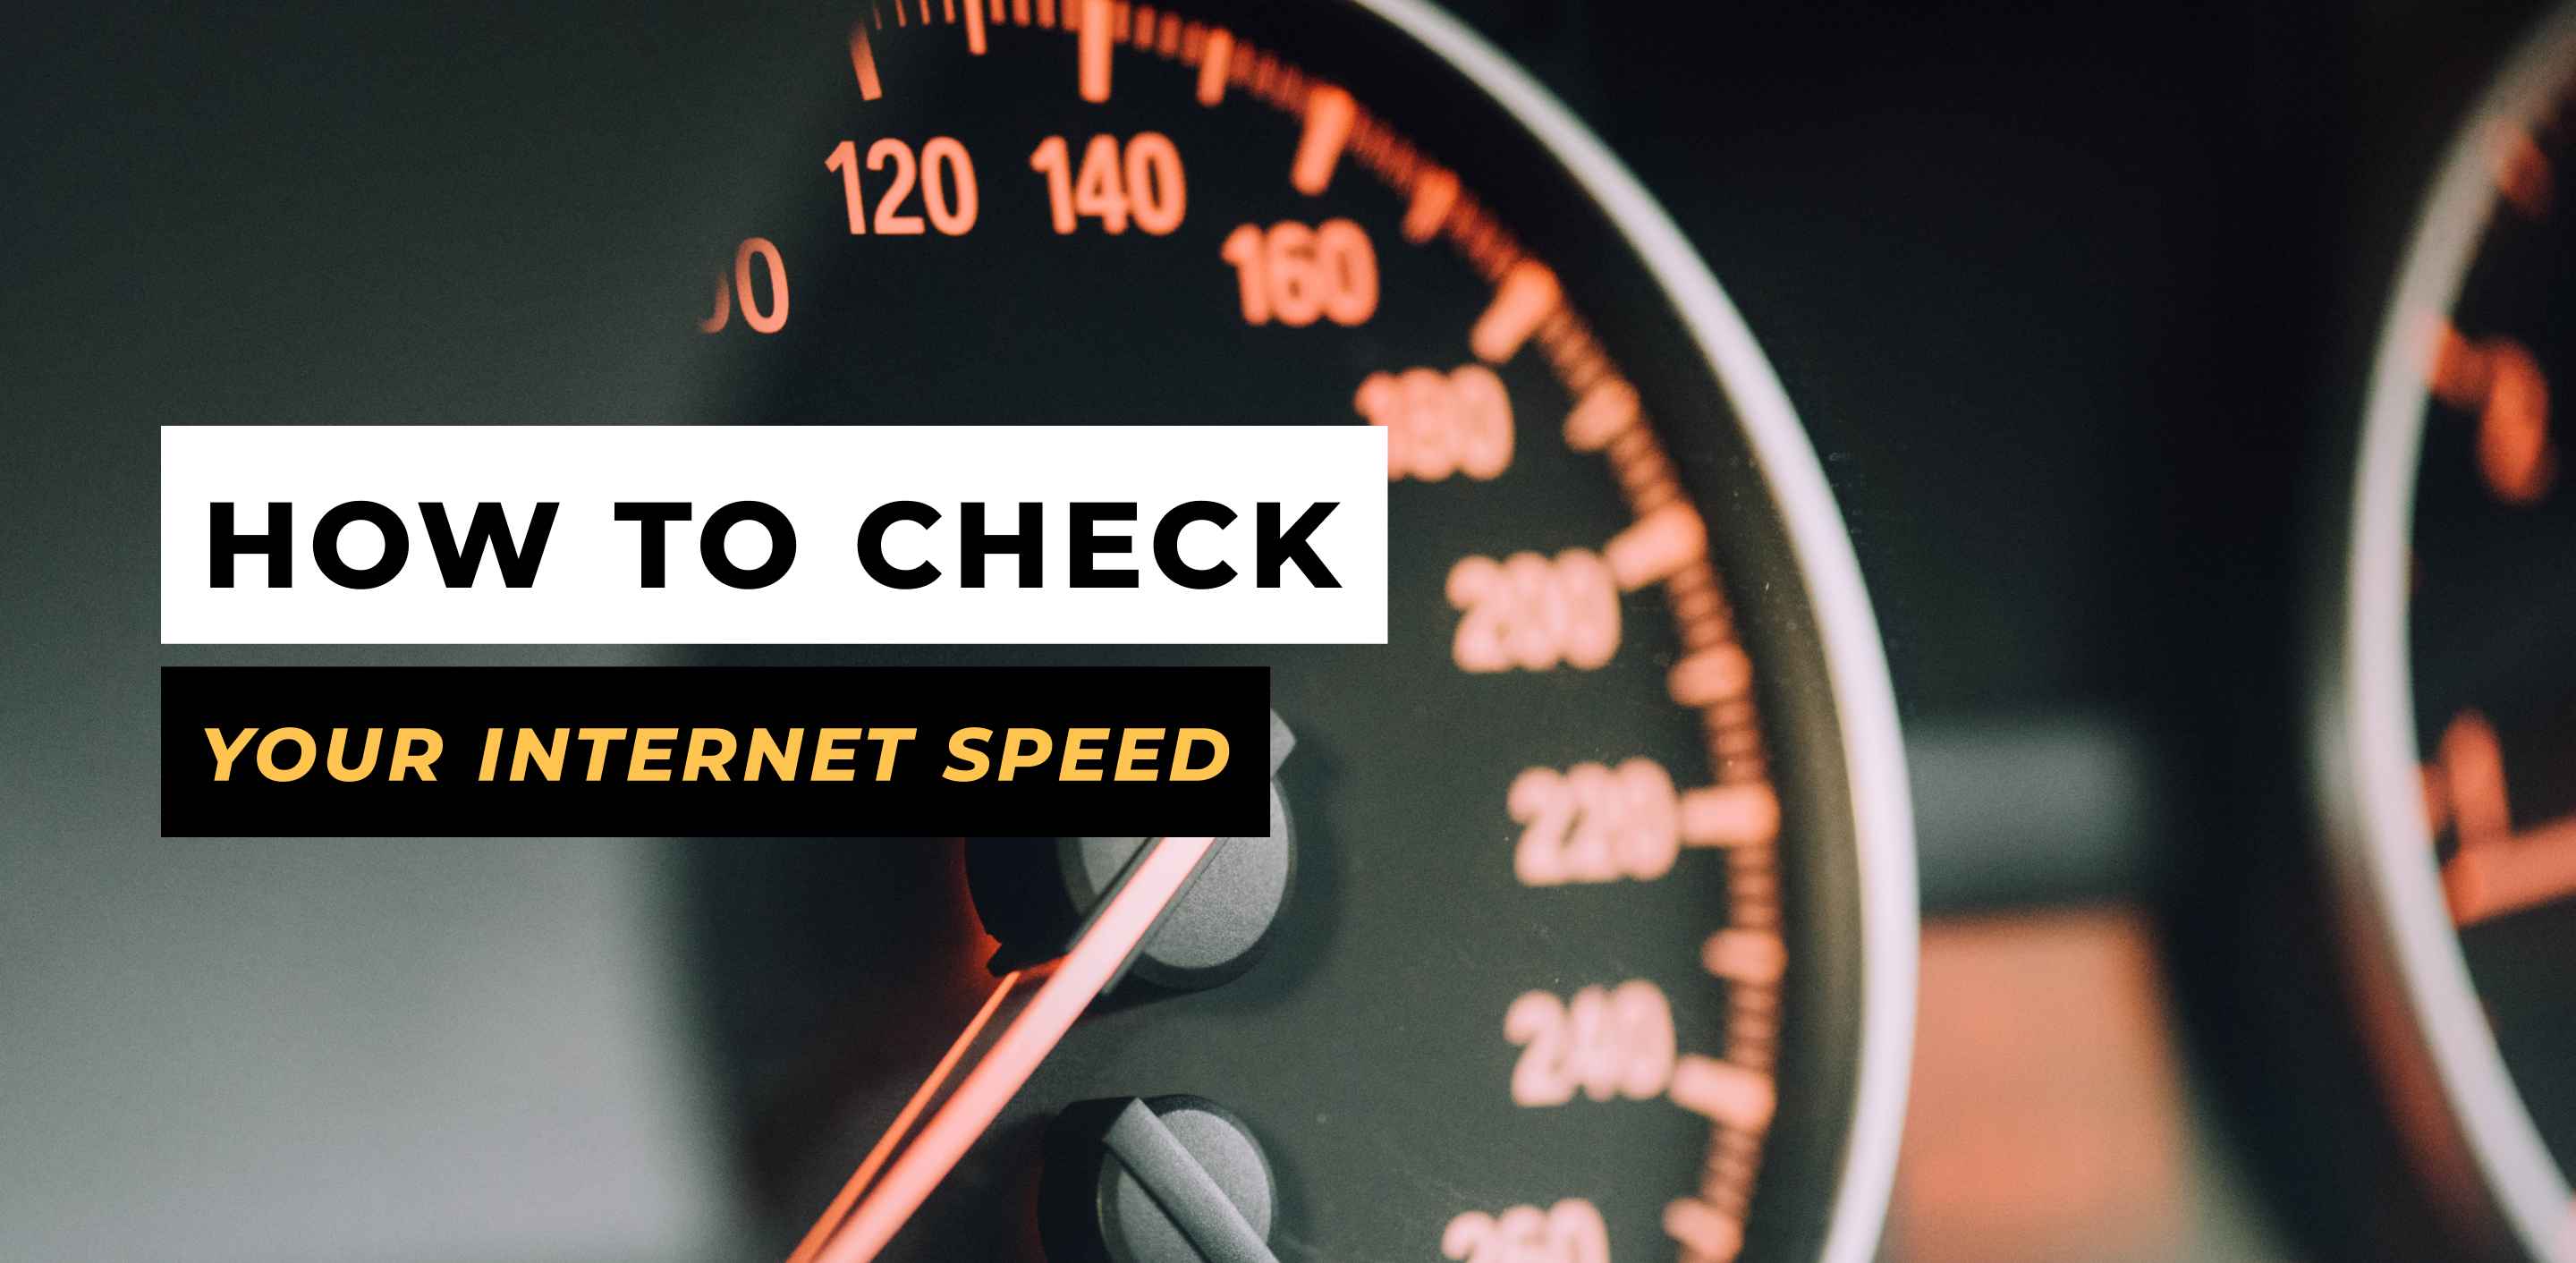 How to Check Your Internet Speed Like the Pros